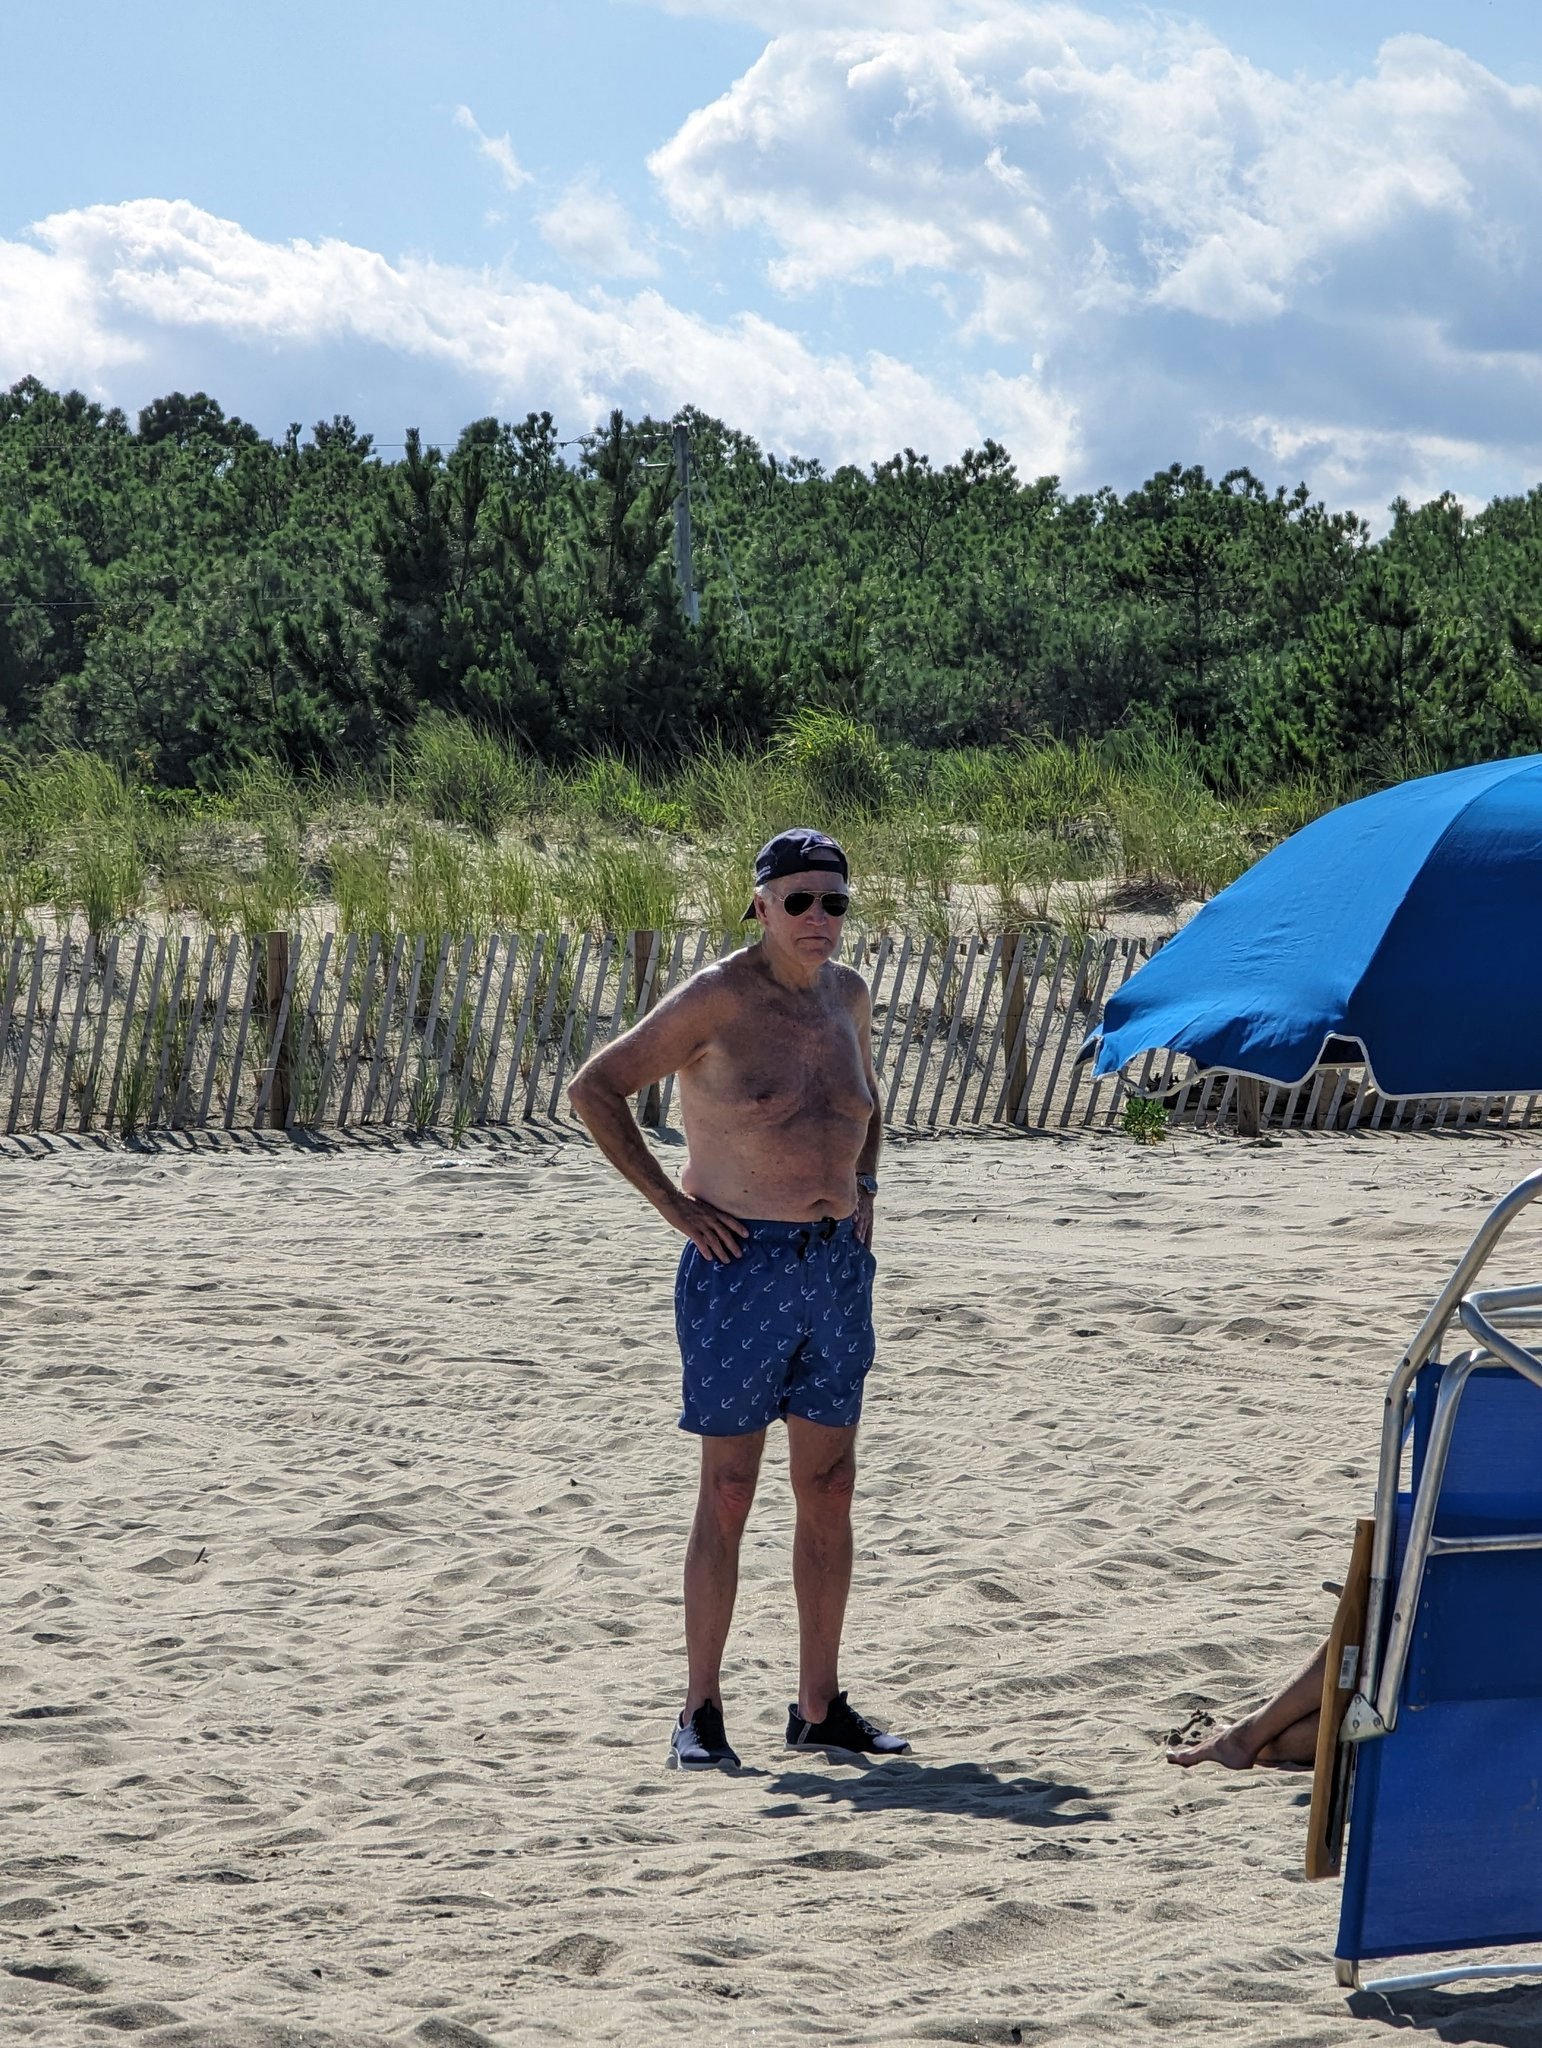 President Biden was photographed shirtless while enjoying his leisure time on the Delaware beach. Twitter